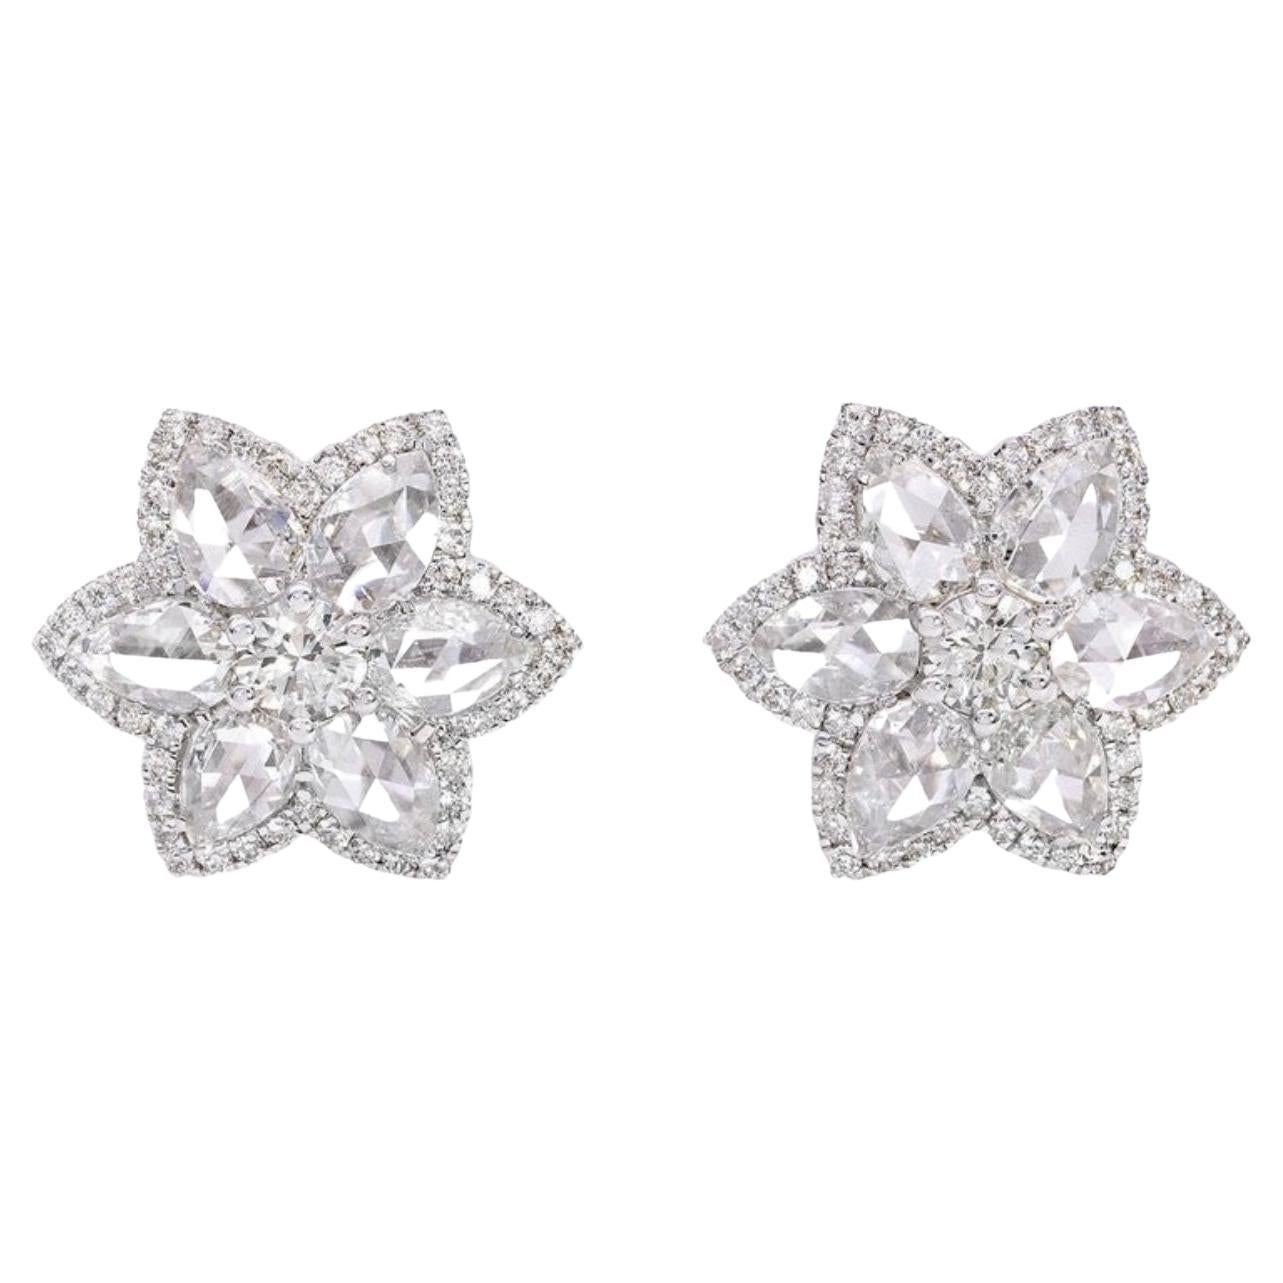 3.50 Carat Round Brilliant and Rose Cut Diamond Star Stud Earrings in 18K Gold.